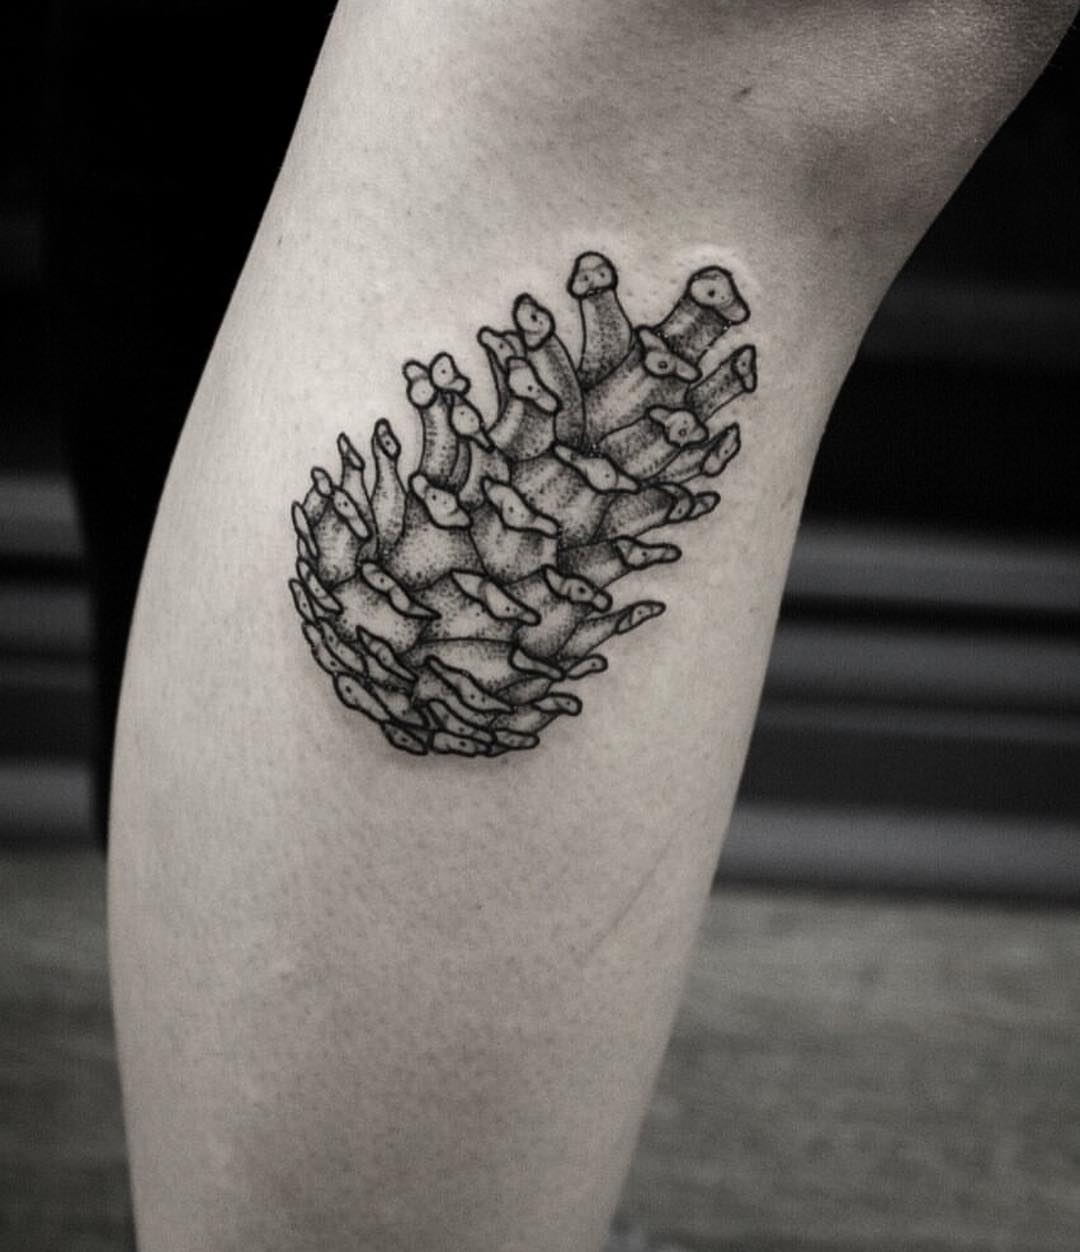 Pinecone tattoo by Jas